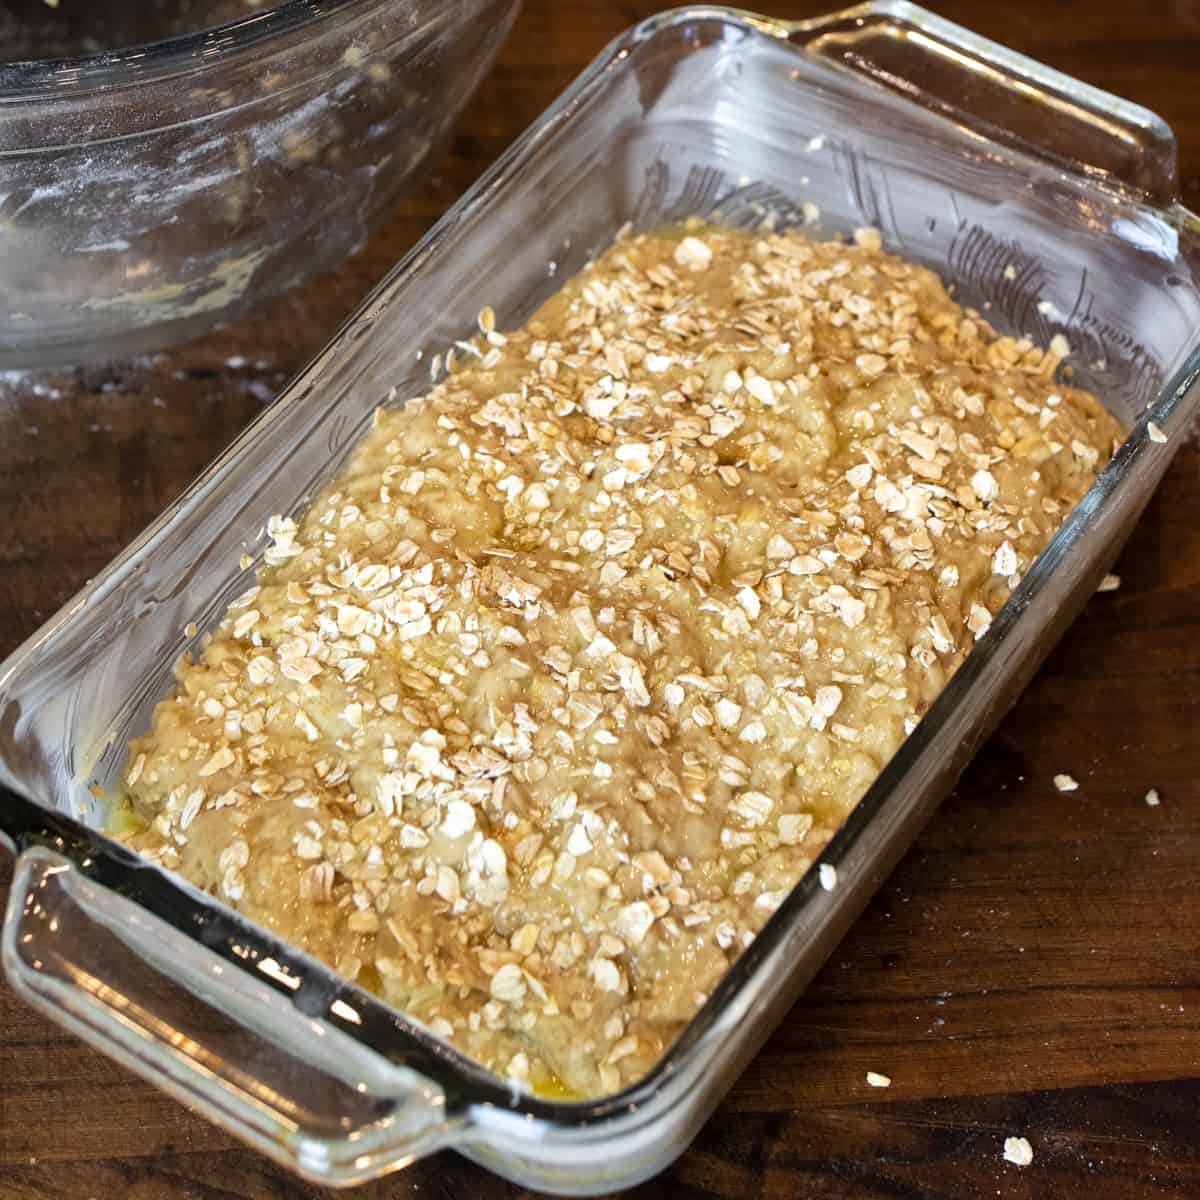 Bread batter in a loaf pan ready to go into the oven.